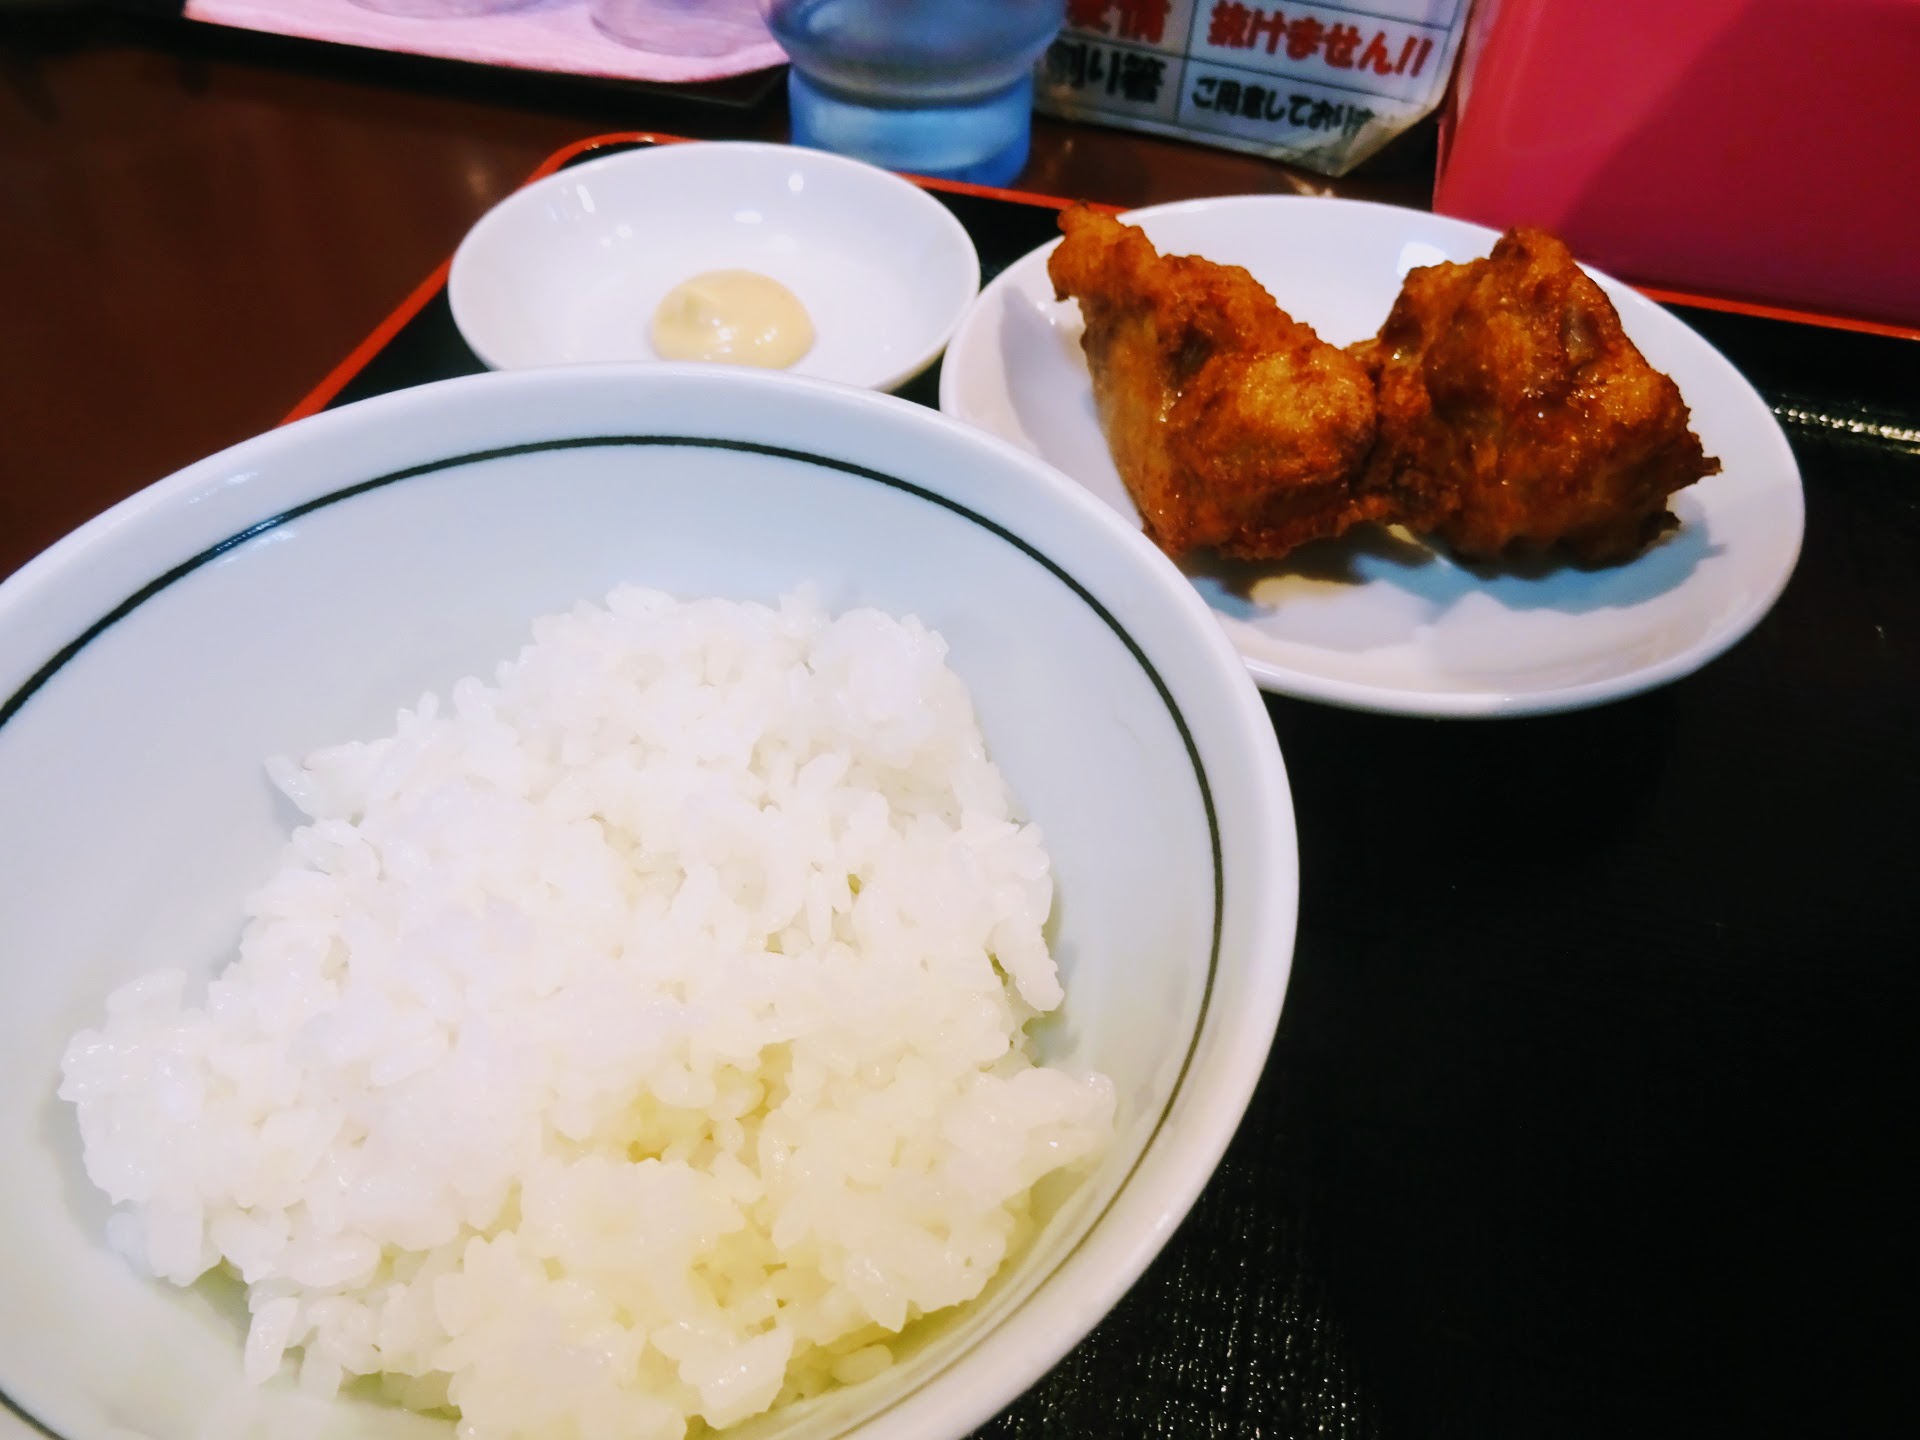 Aランチ(100円)